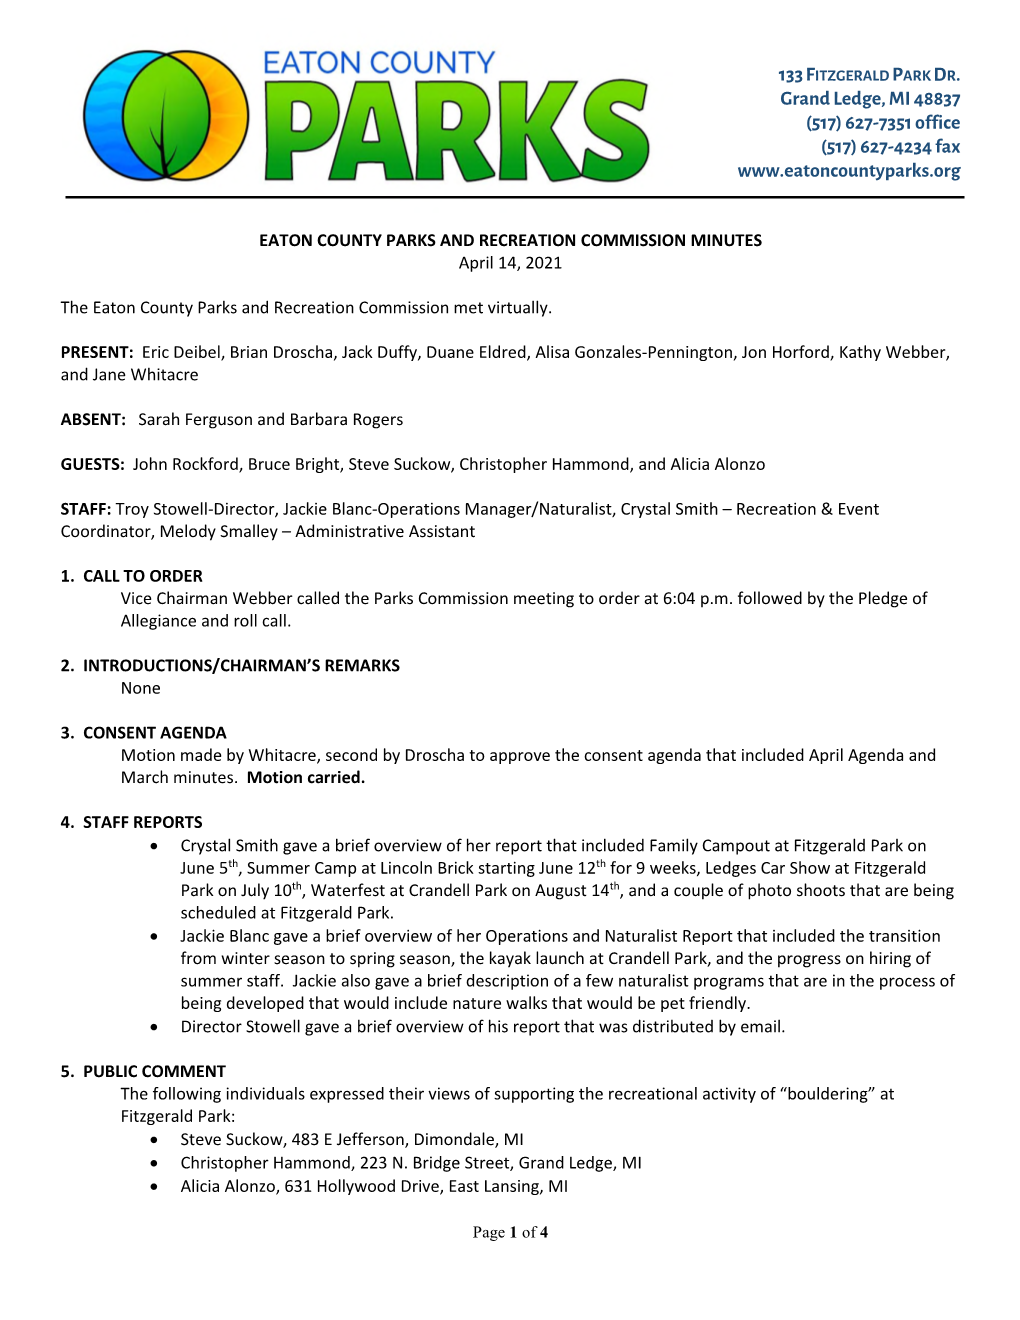 EATON COUNTY PARKS and RECREATION COMMISSION MINUTES April 14, 2021